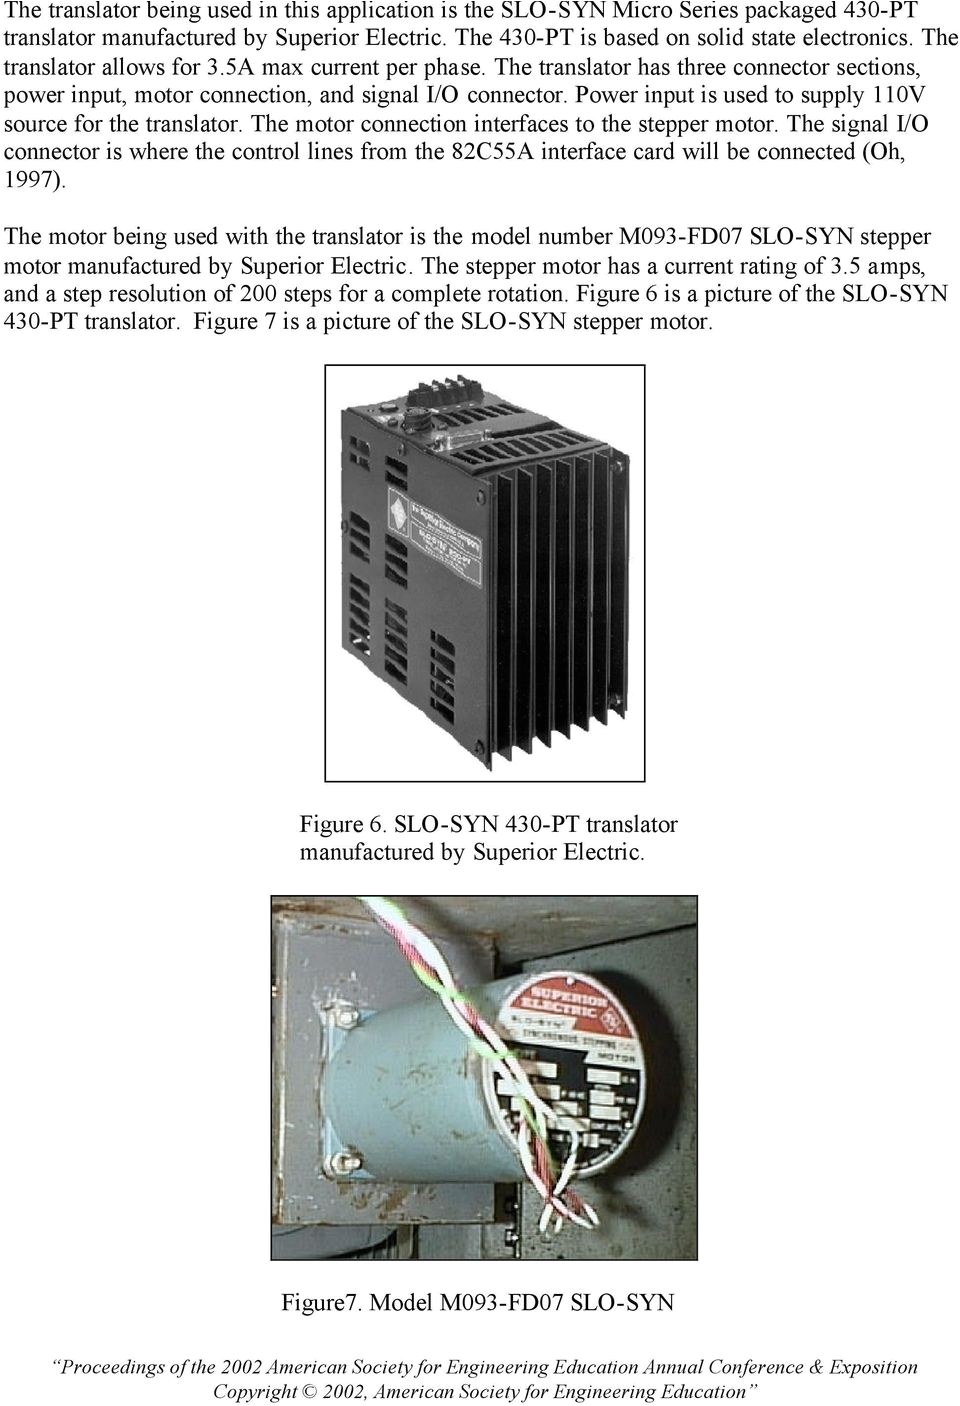 slo syn power input is used to supply 0v source for the translator the motor connection interfaces